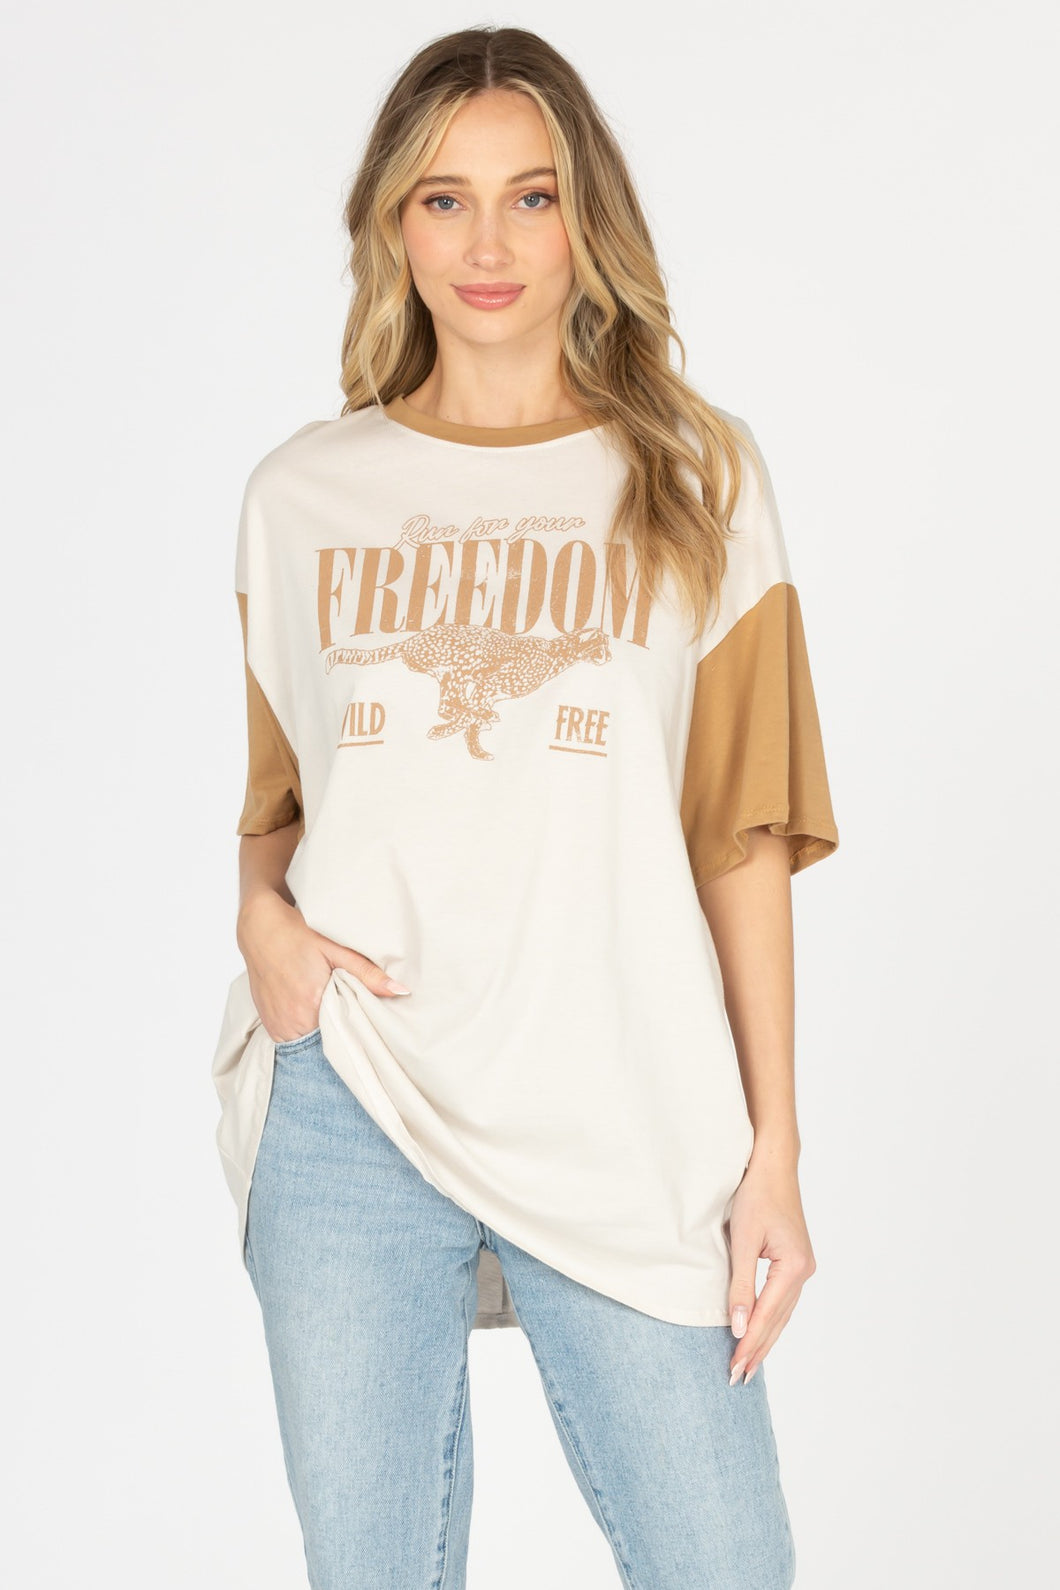 Run For Your Freedom Graphic Tee